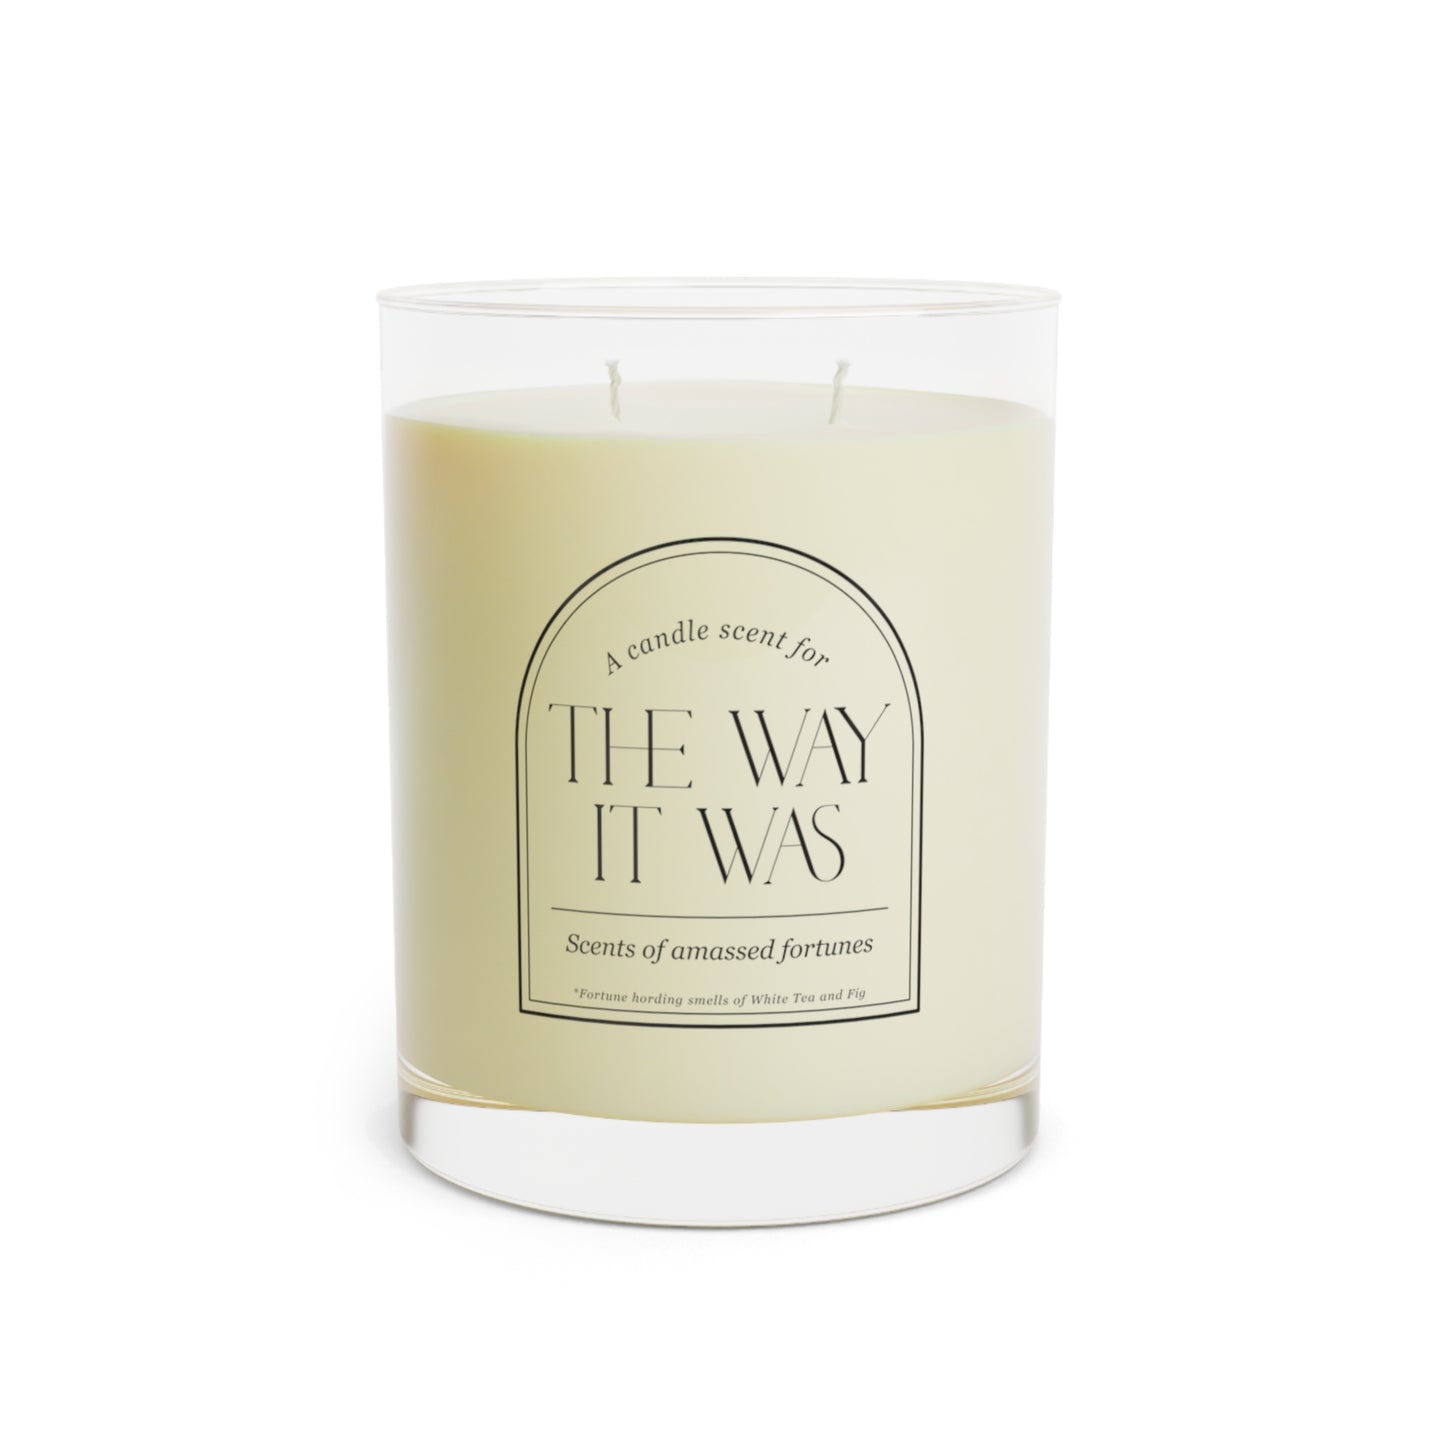 Scents of amassed fortunes - White Tea and Fig Scented Candle